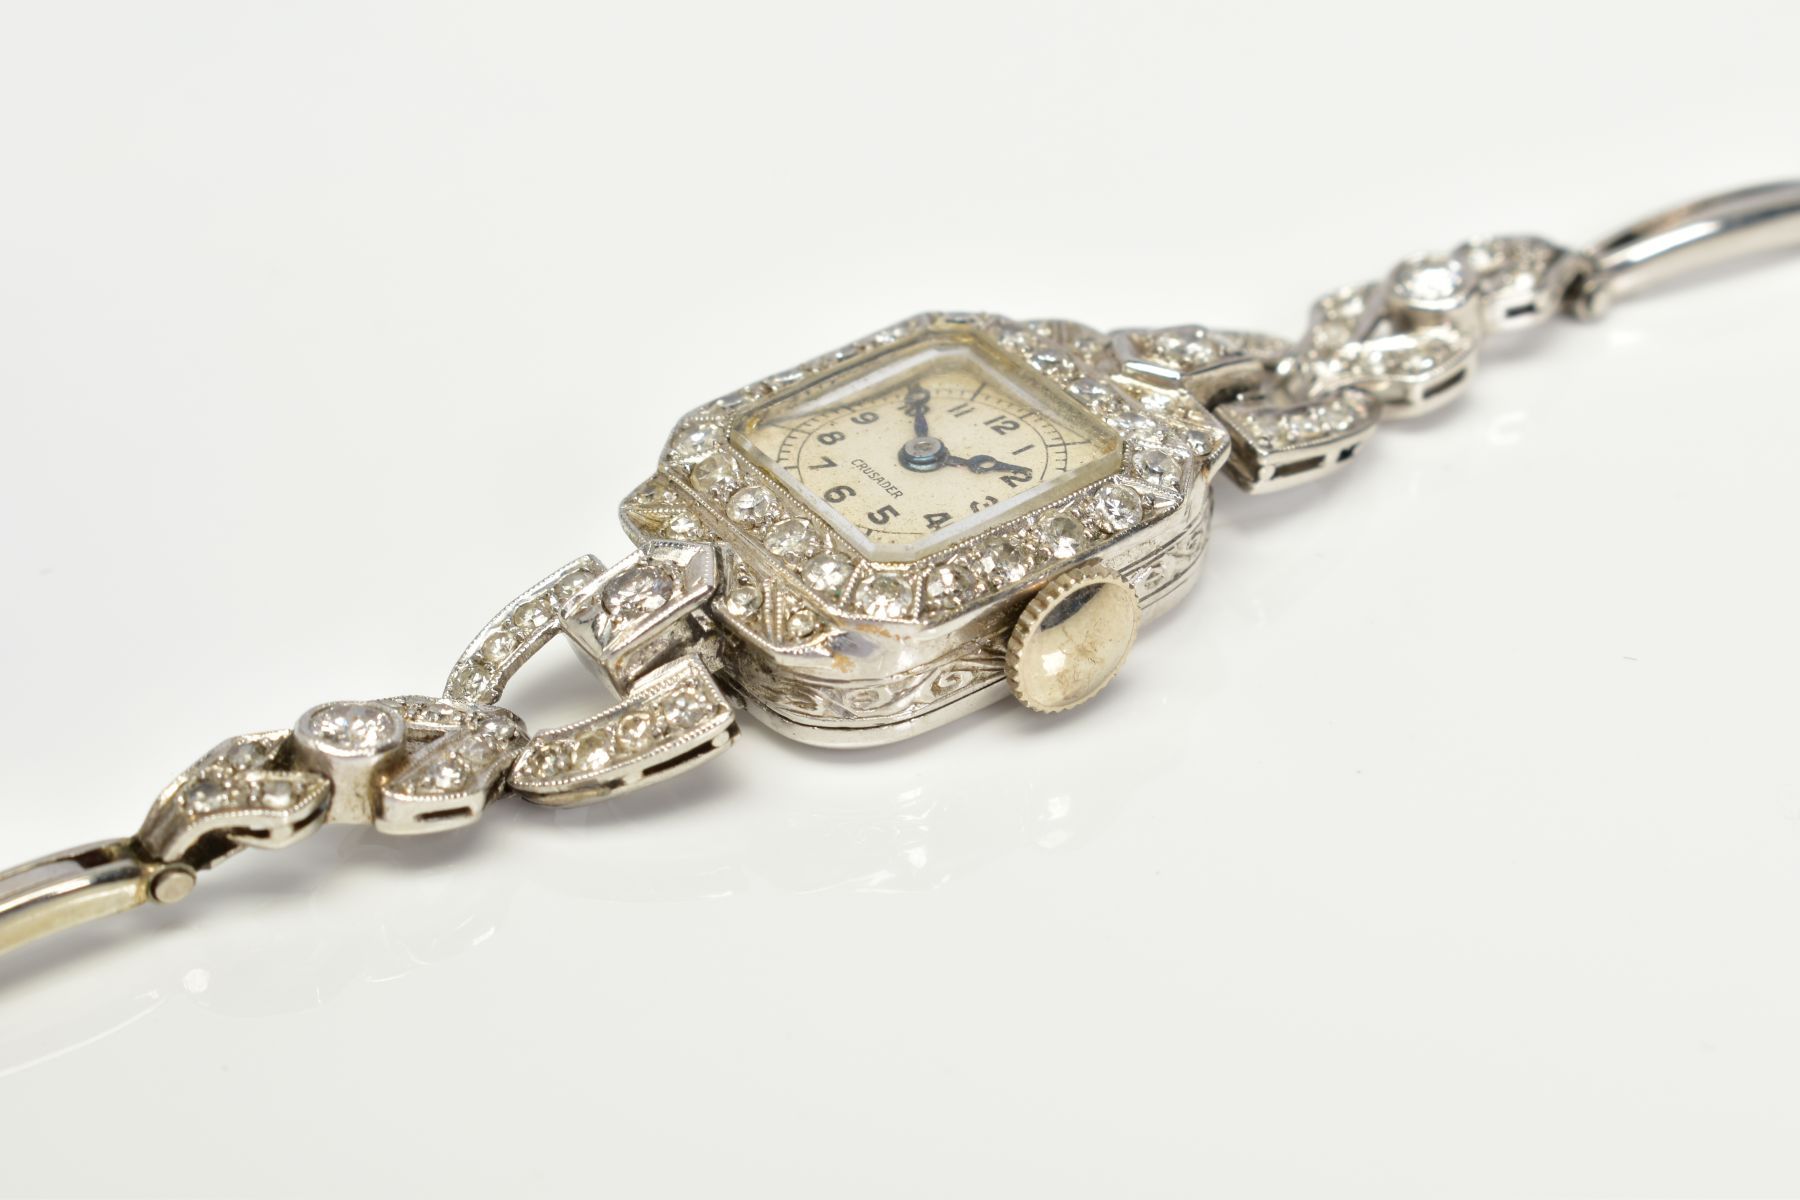 AN EARLY 20TH CENTURY PLATINUM AND 18CT CRUSADER COCKTAIL WATCH, silvered dial with Arabic numerals, - Image 4 of 5